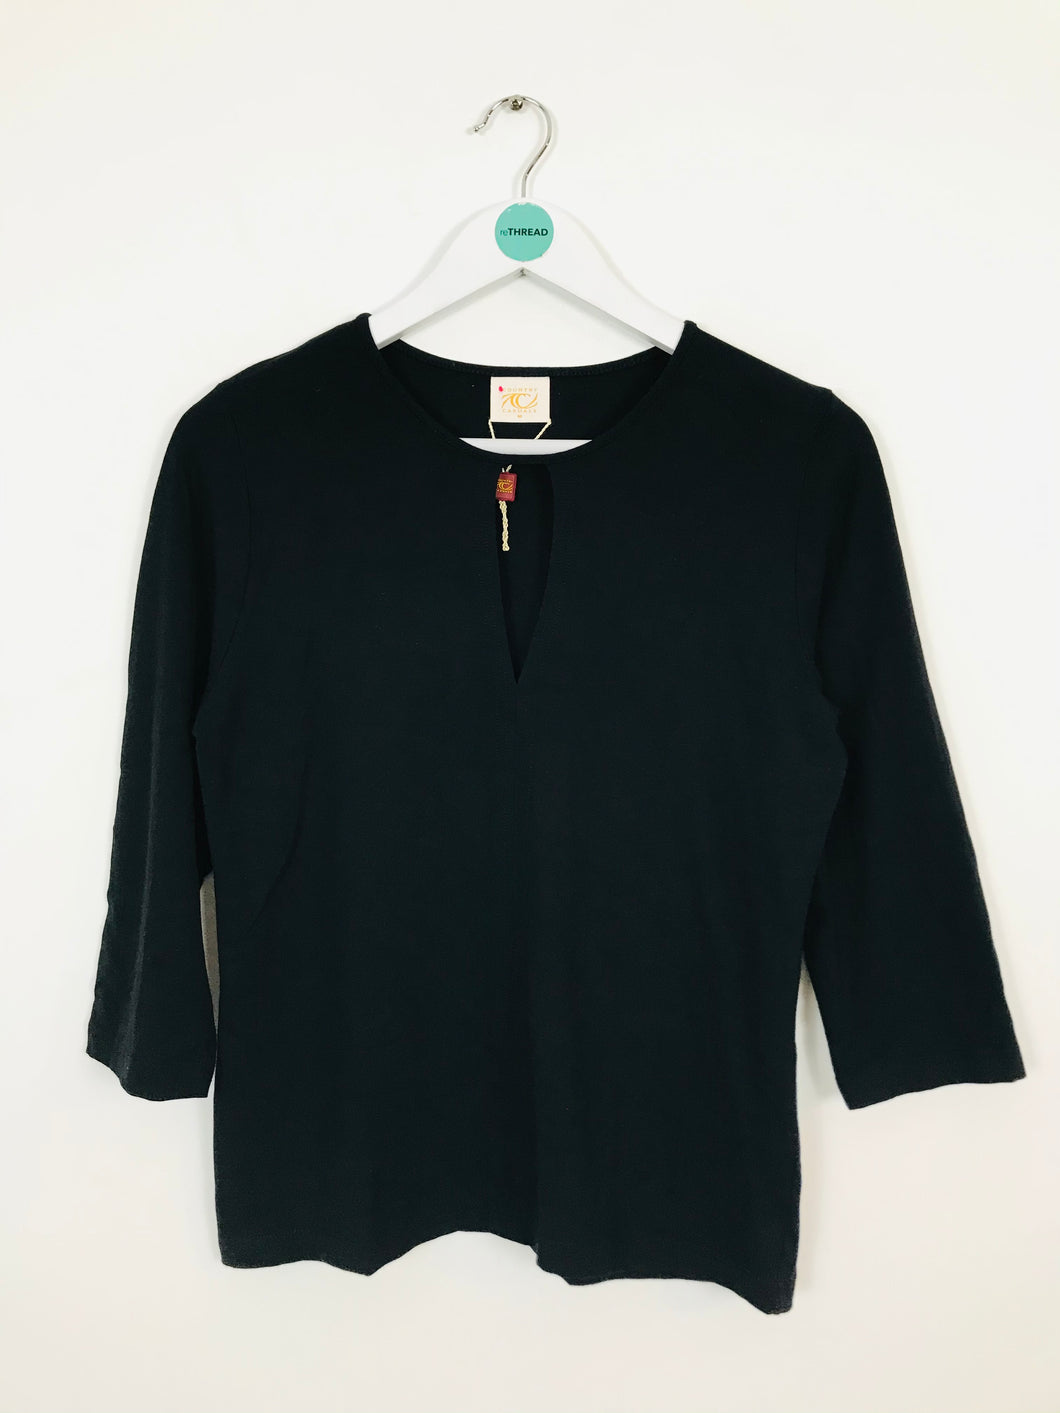 Country Casuals Women’s 3/4 Length Sleeve Top | M UK 10 | Black